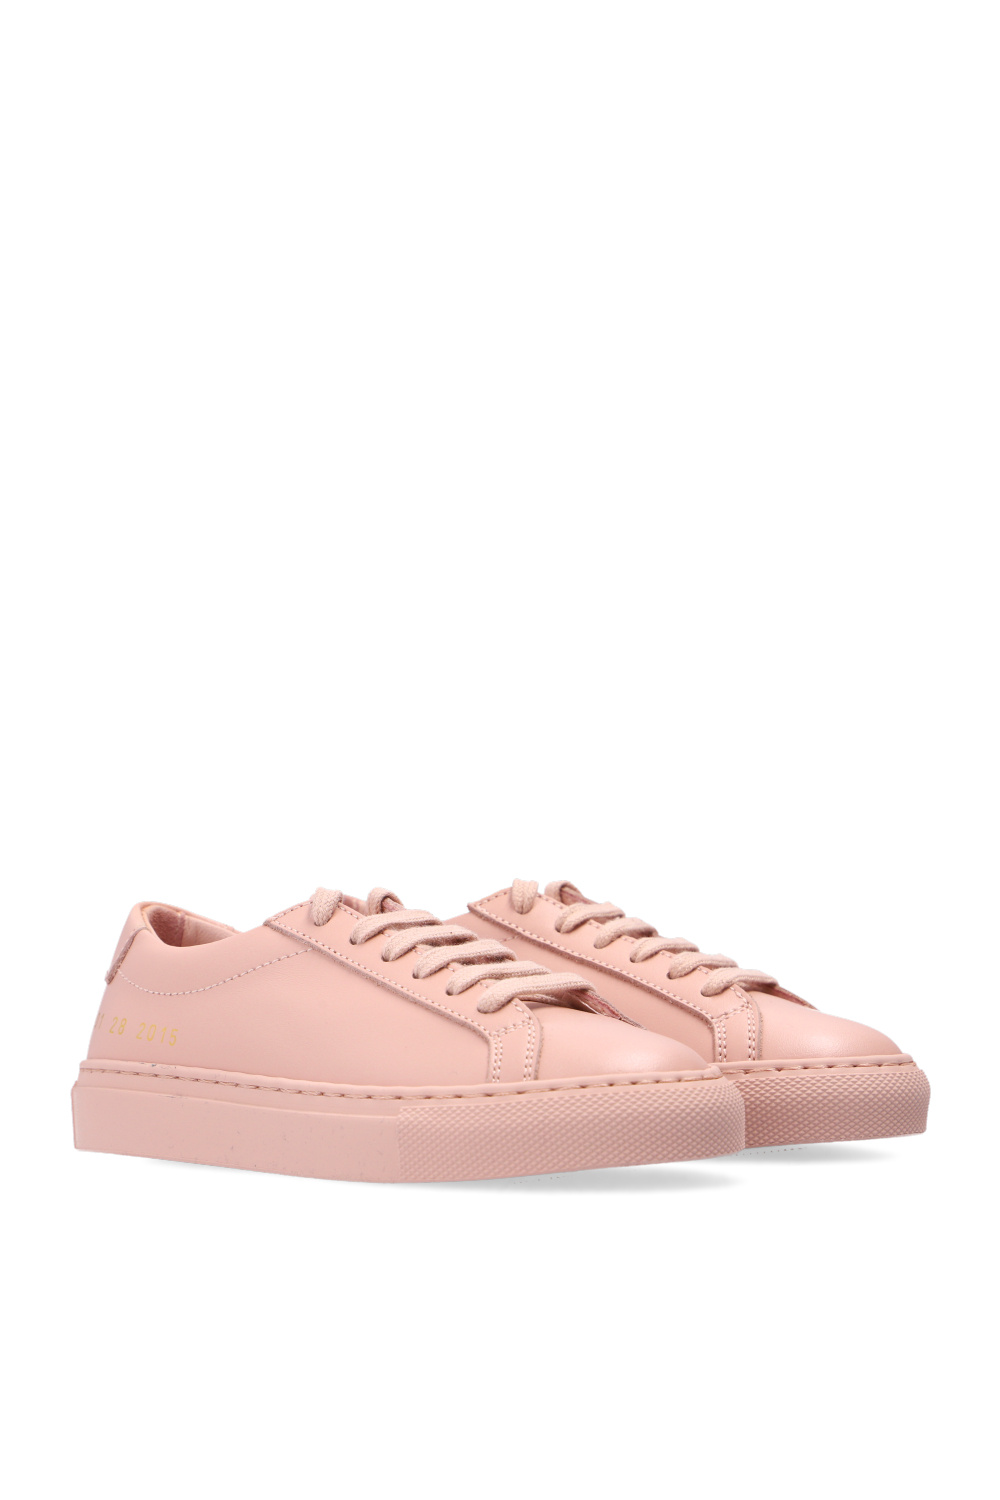 Common Projects Kids ‘Achilles’ sneakers | Kids's Kids shoes (25-39 ...